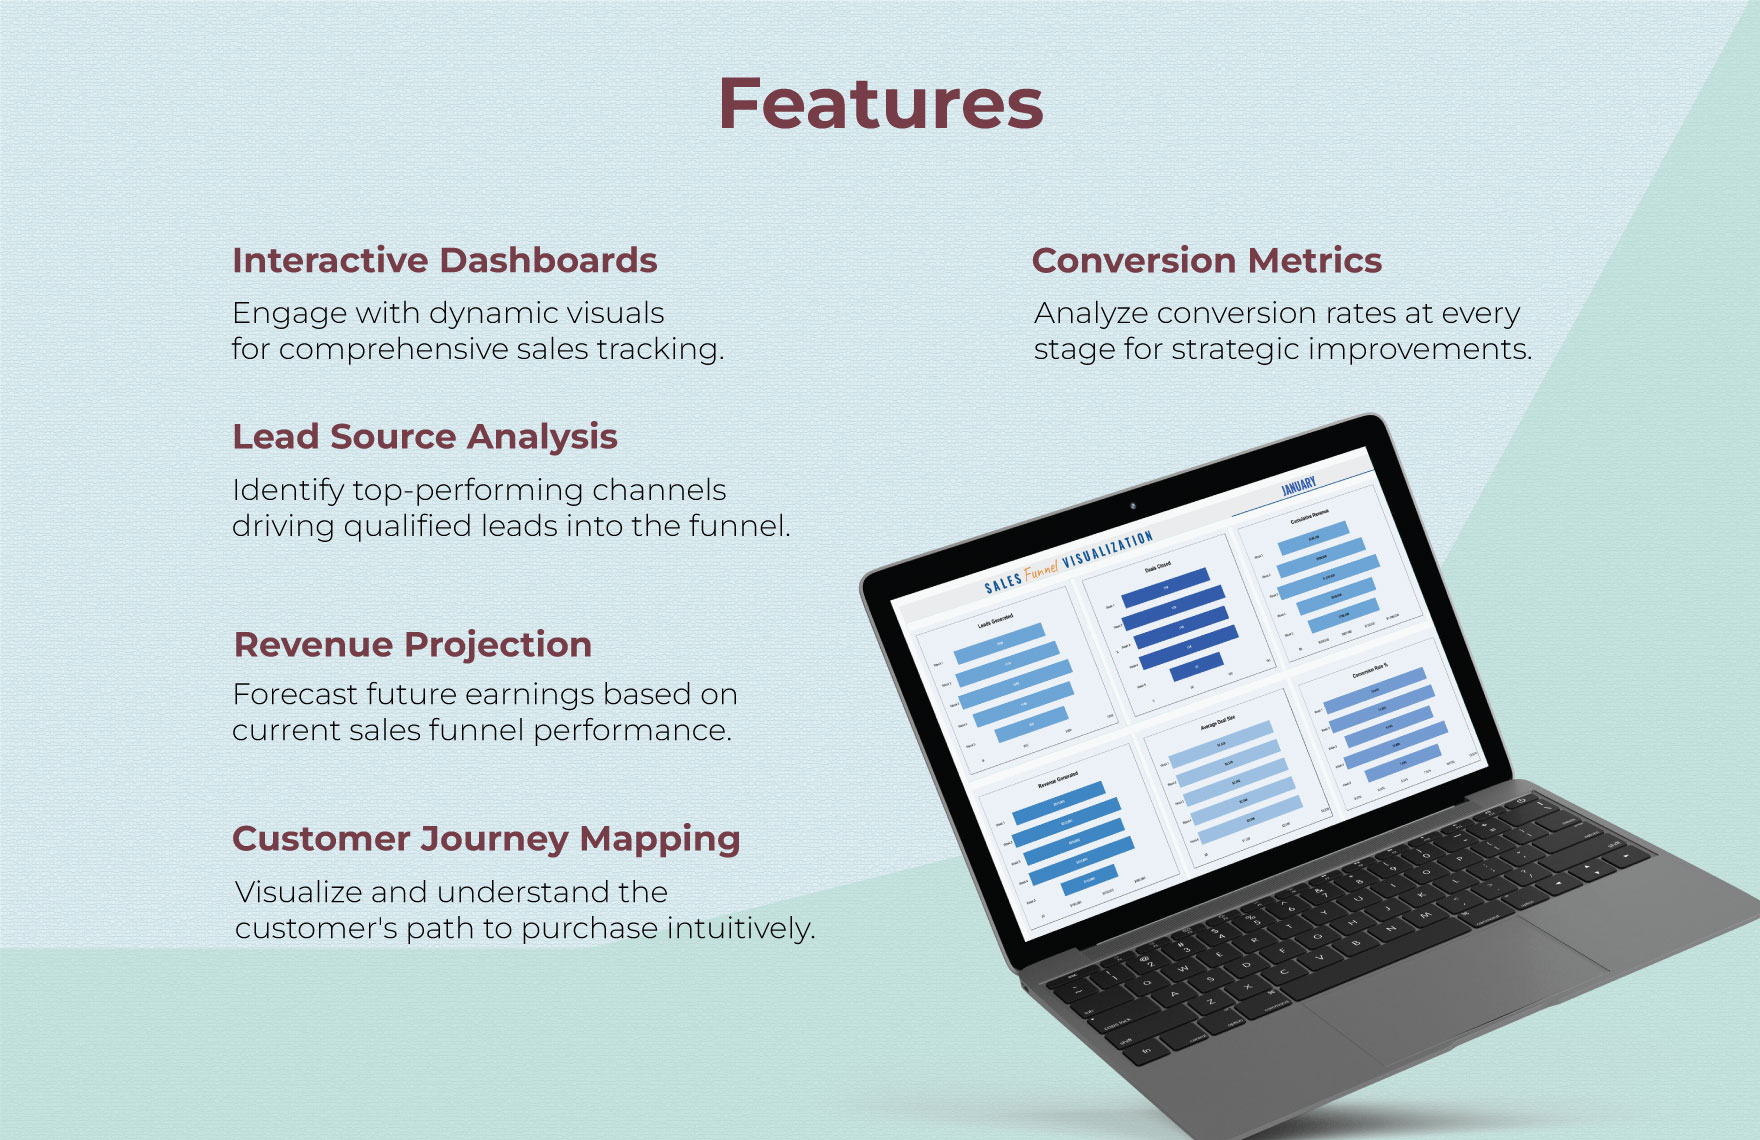 Sales Funnel Visualization Template